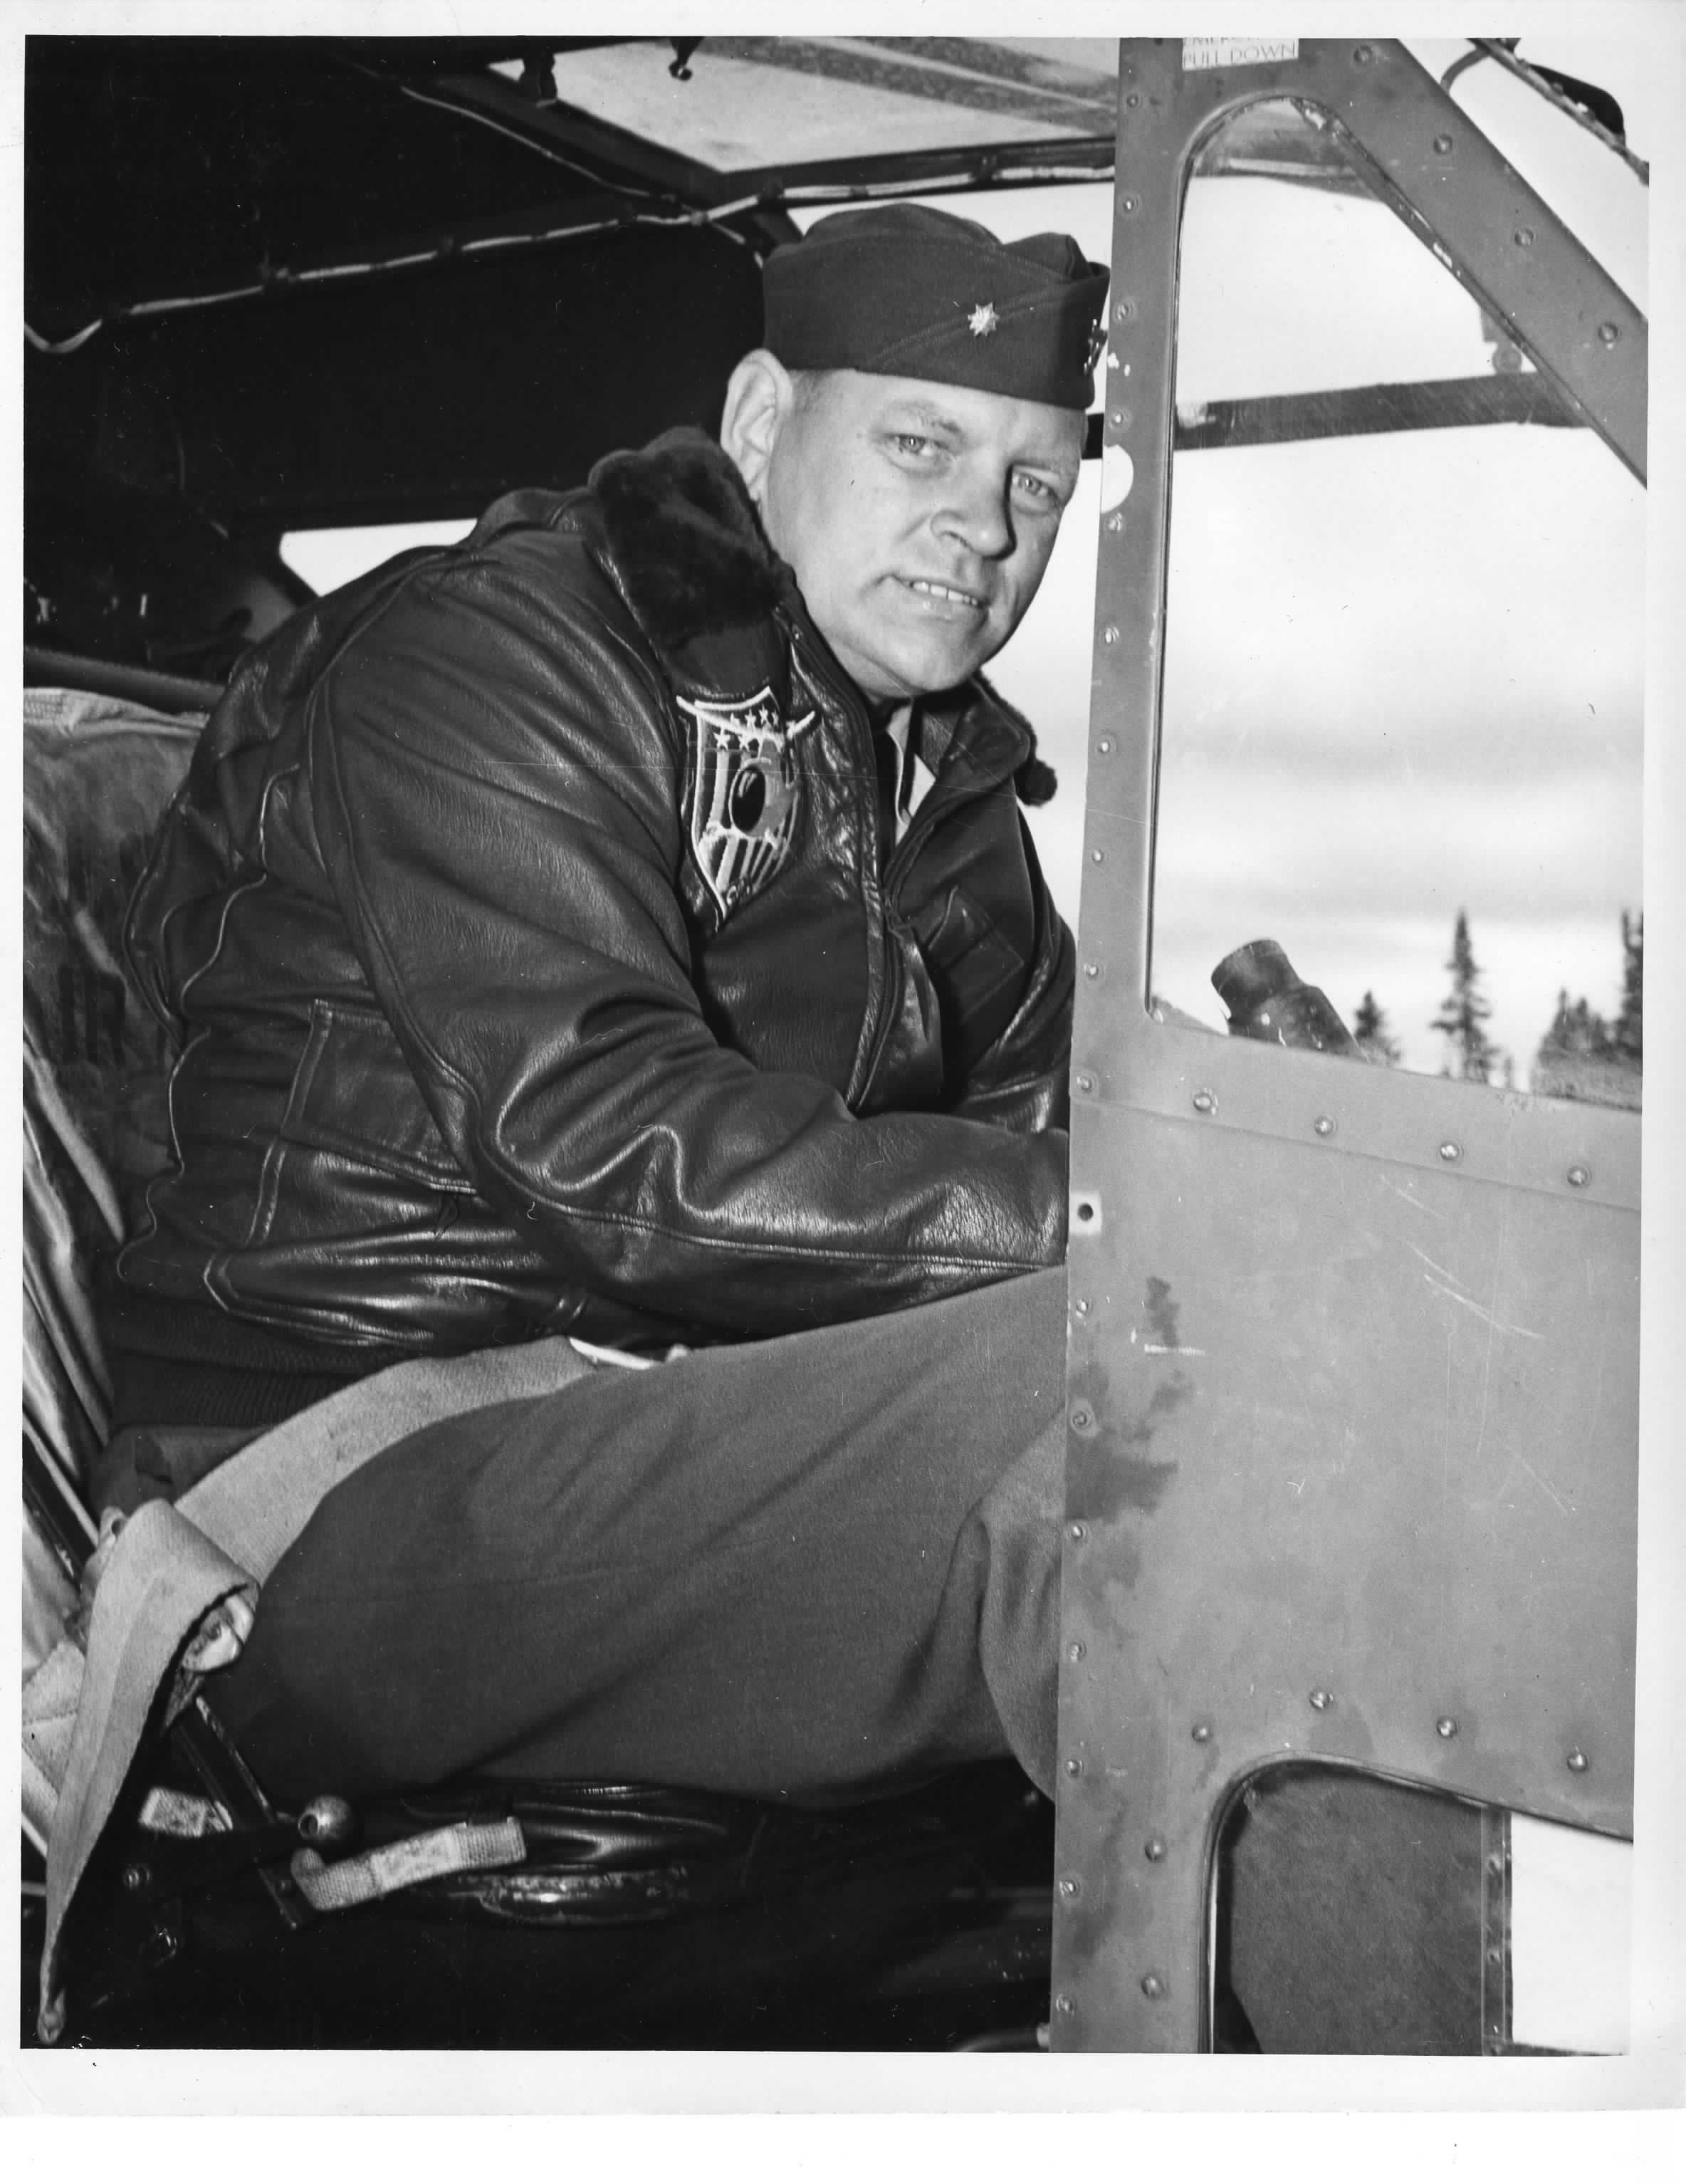 Lt. Cmdr. Frank Erickson, pioneer of helicopter flight, posing in the cockpit of a Coast Guard helicopter. (U.S. Coast Guard)